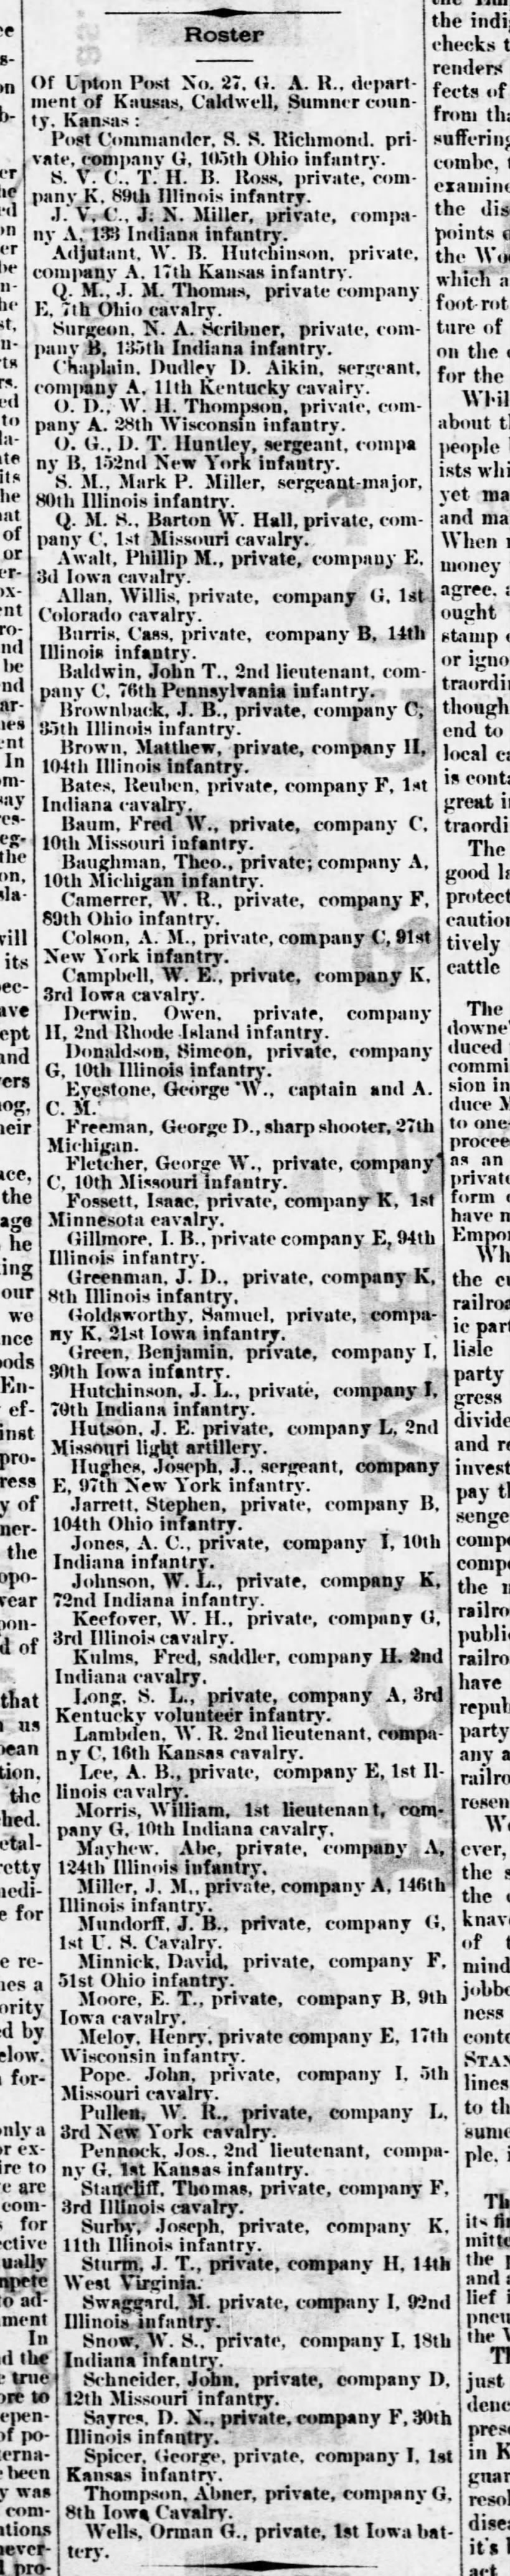 Roster of Upton Post, Caldwell, KS, Caldwell Daily Standard, 27 Mar 1884